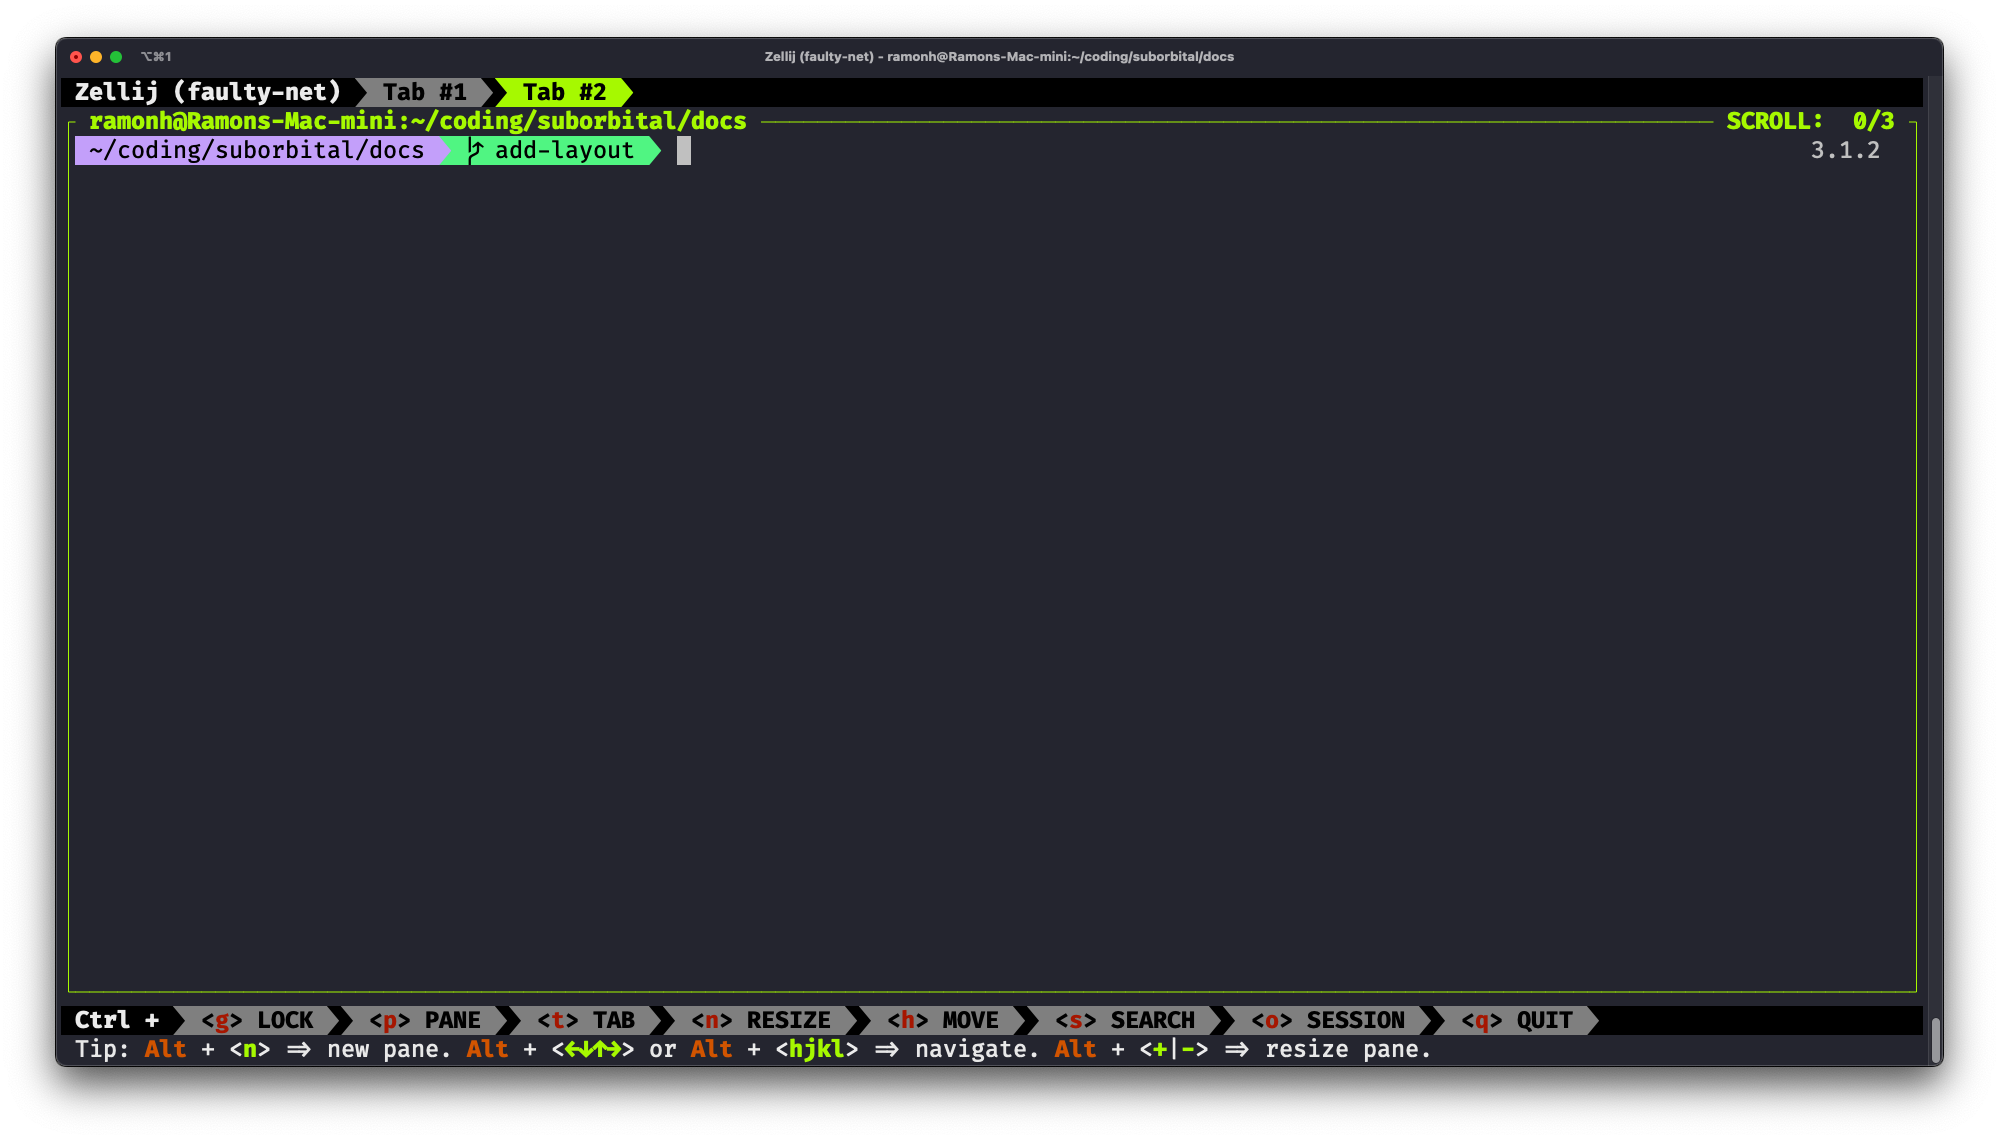 Screenshot of iTerm showing Zellij running with a tab bar at the top, the middle terminal pane, and the bottom state and shortcuts bar.